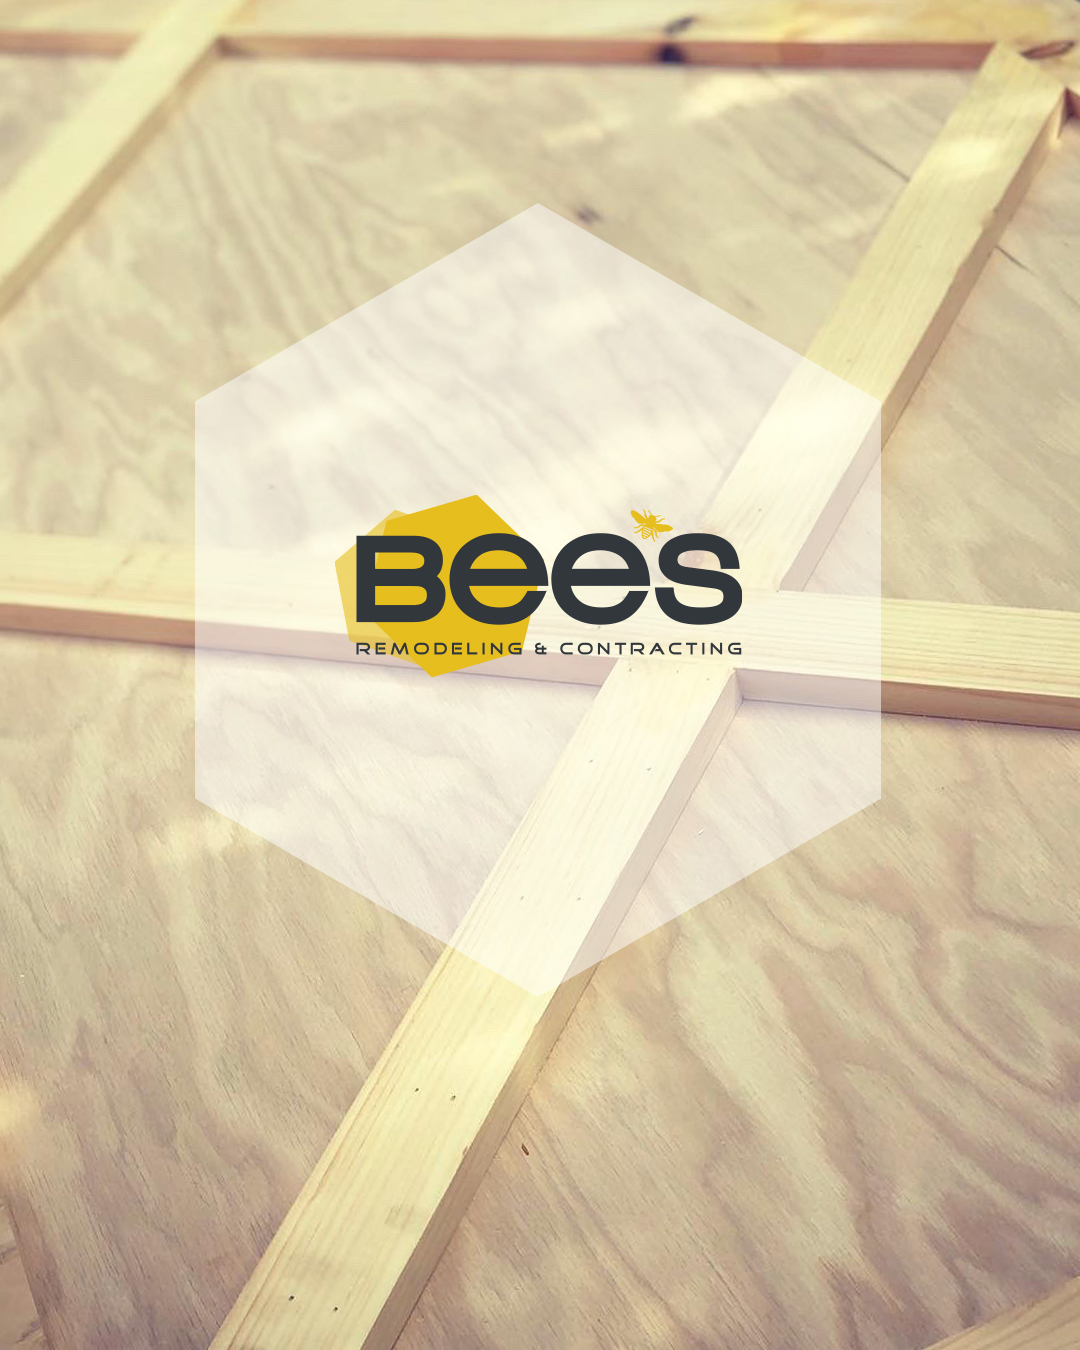 Bee’s Remodeling & Contracting